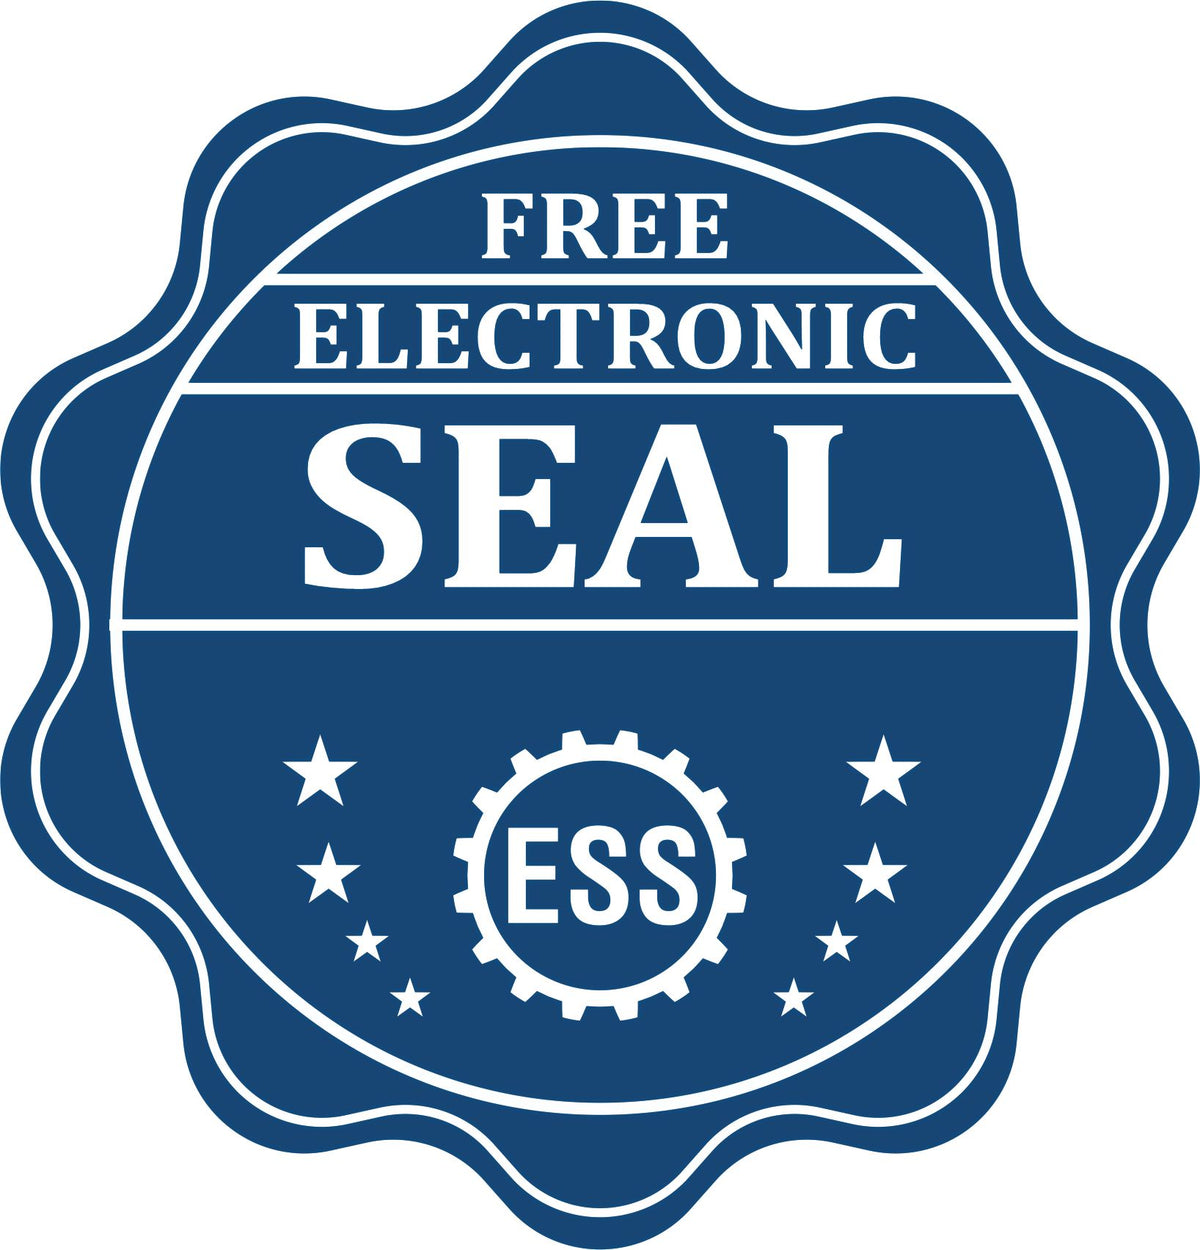 A badge showing a free electronic seal for the Soft Idaho Professional Engineer Seal with stars and the ESS gear on the emblem.